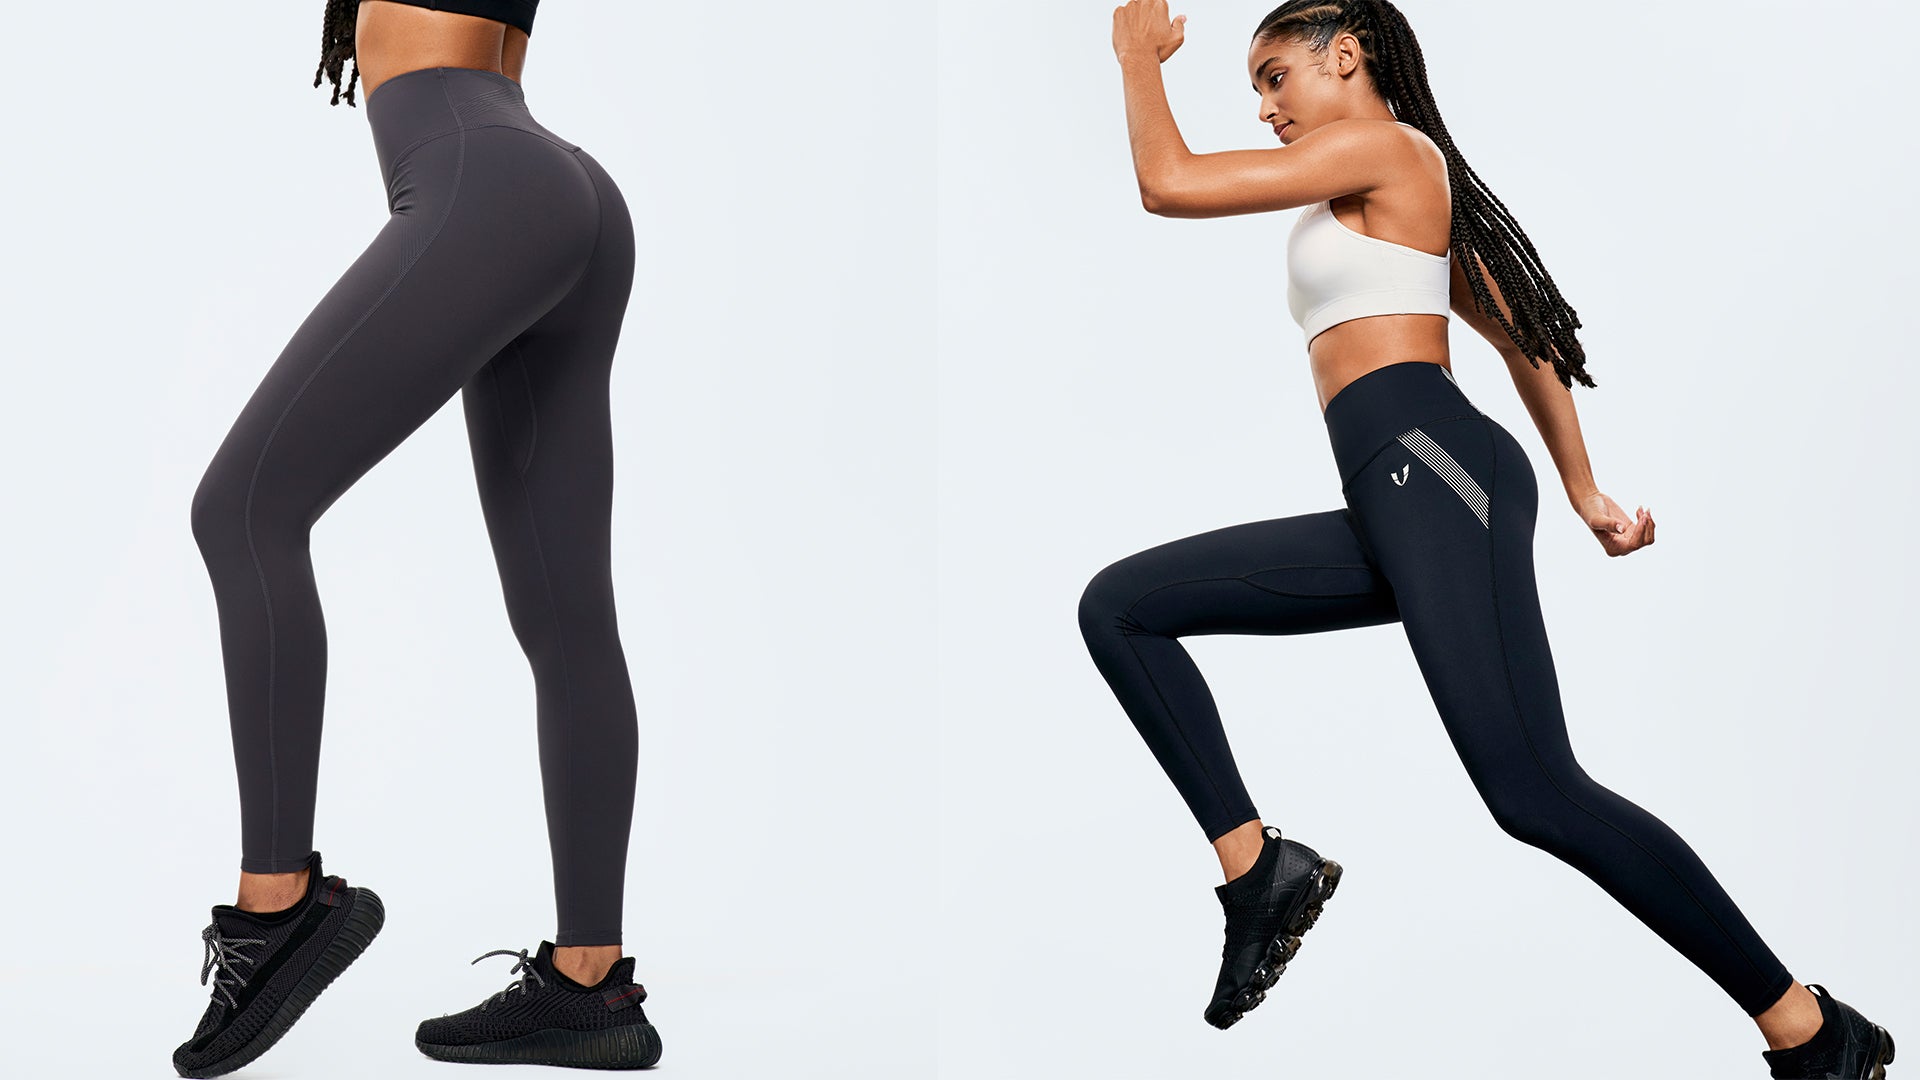 FIRMABS LEGGING & ACTIVEWEAR TRY ON HAUL & REVIEW